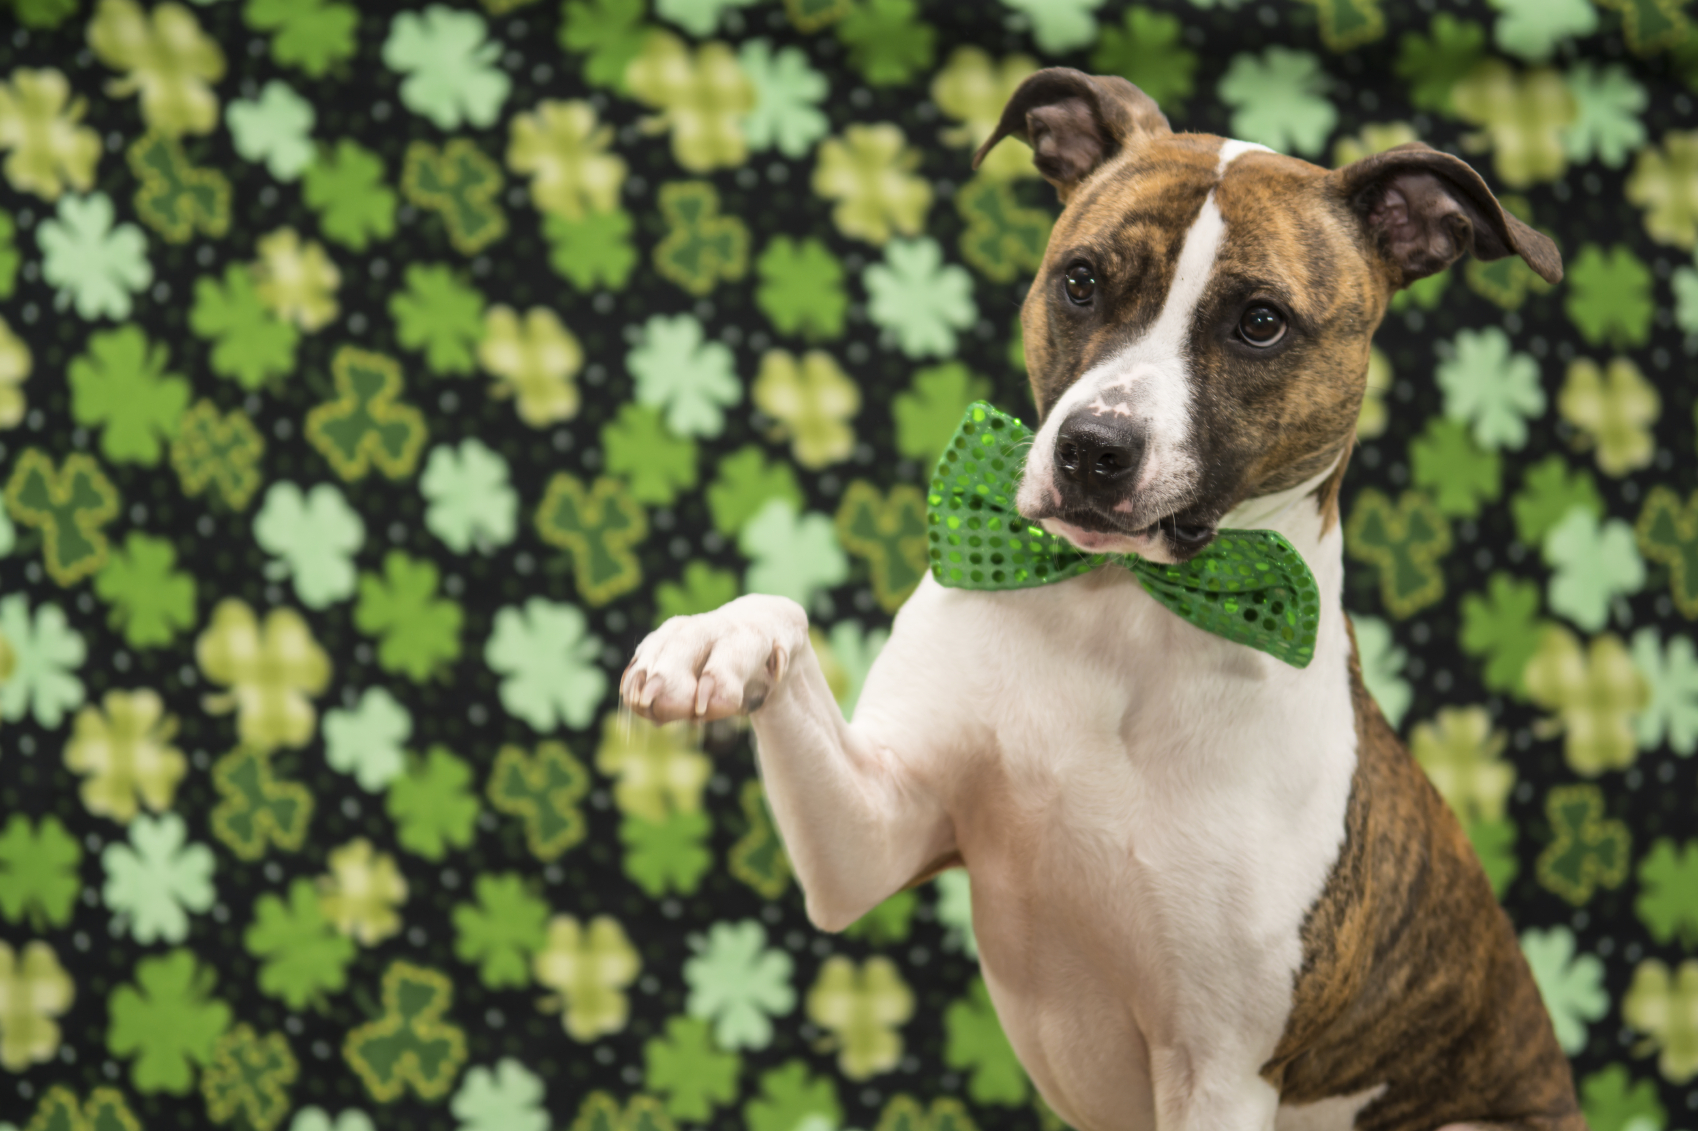 Dog with green bow tie